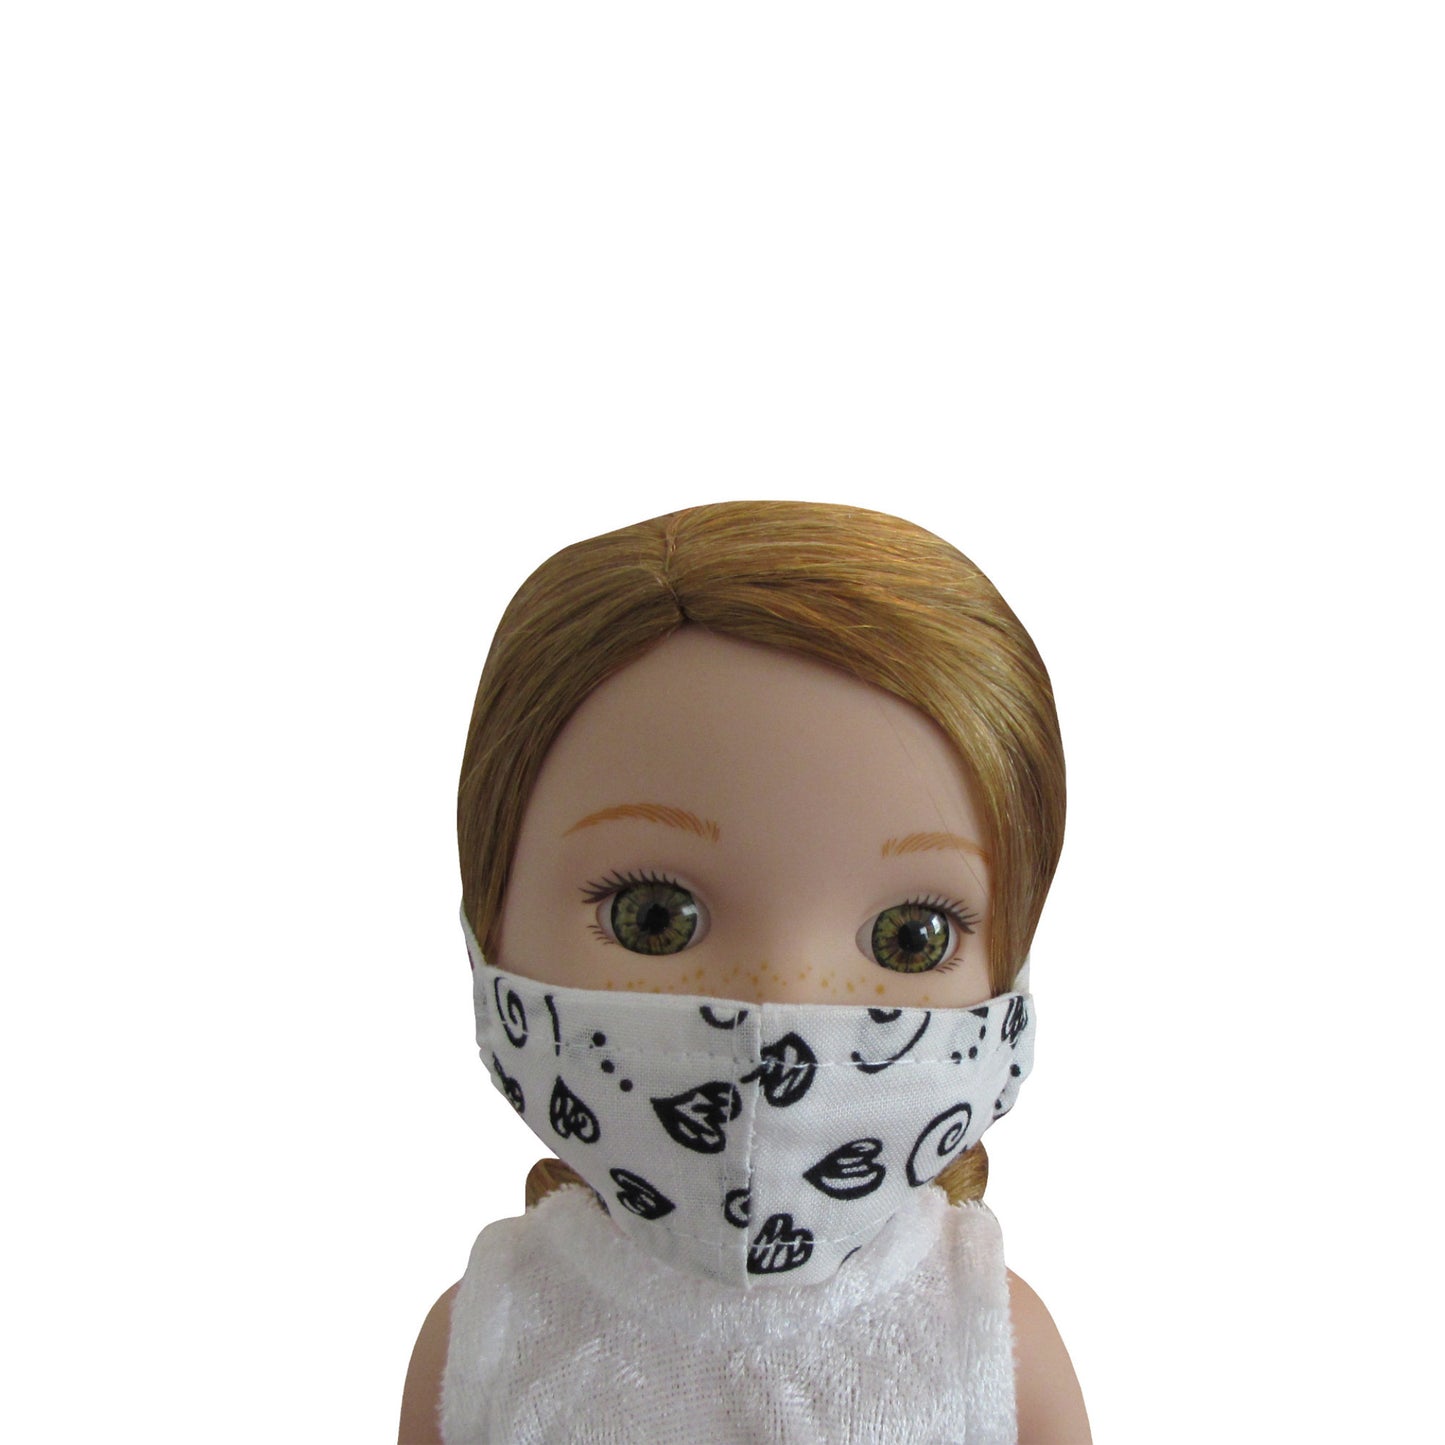 Black Hearts and Swirls on White Print Doll Face Mask for 14 1/2-inch dolls with Wellie Wishers doll Front